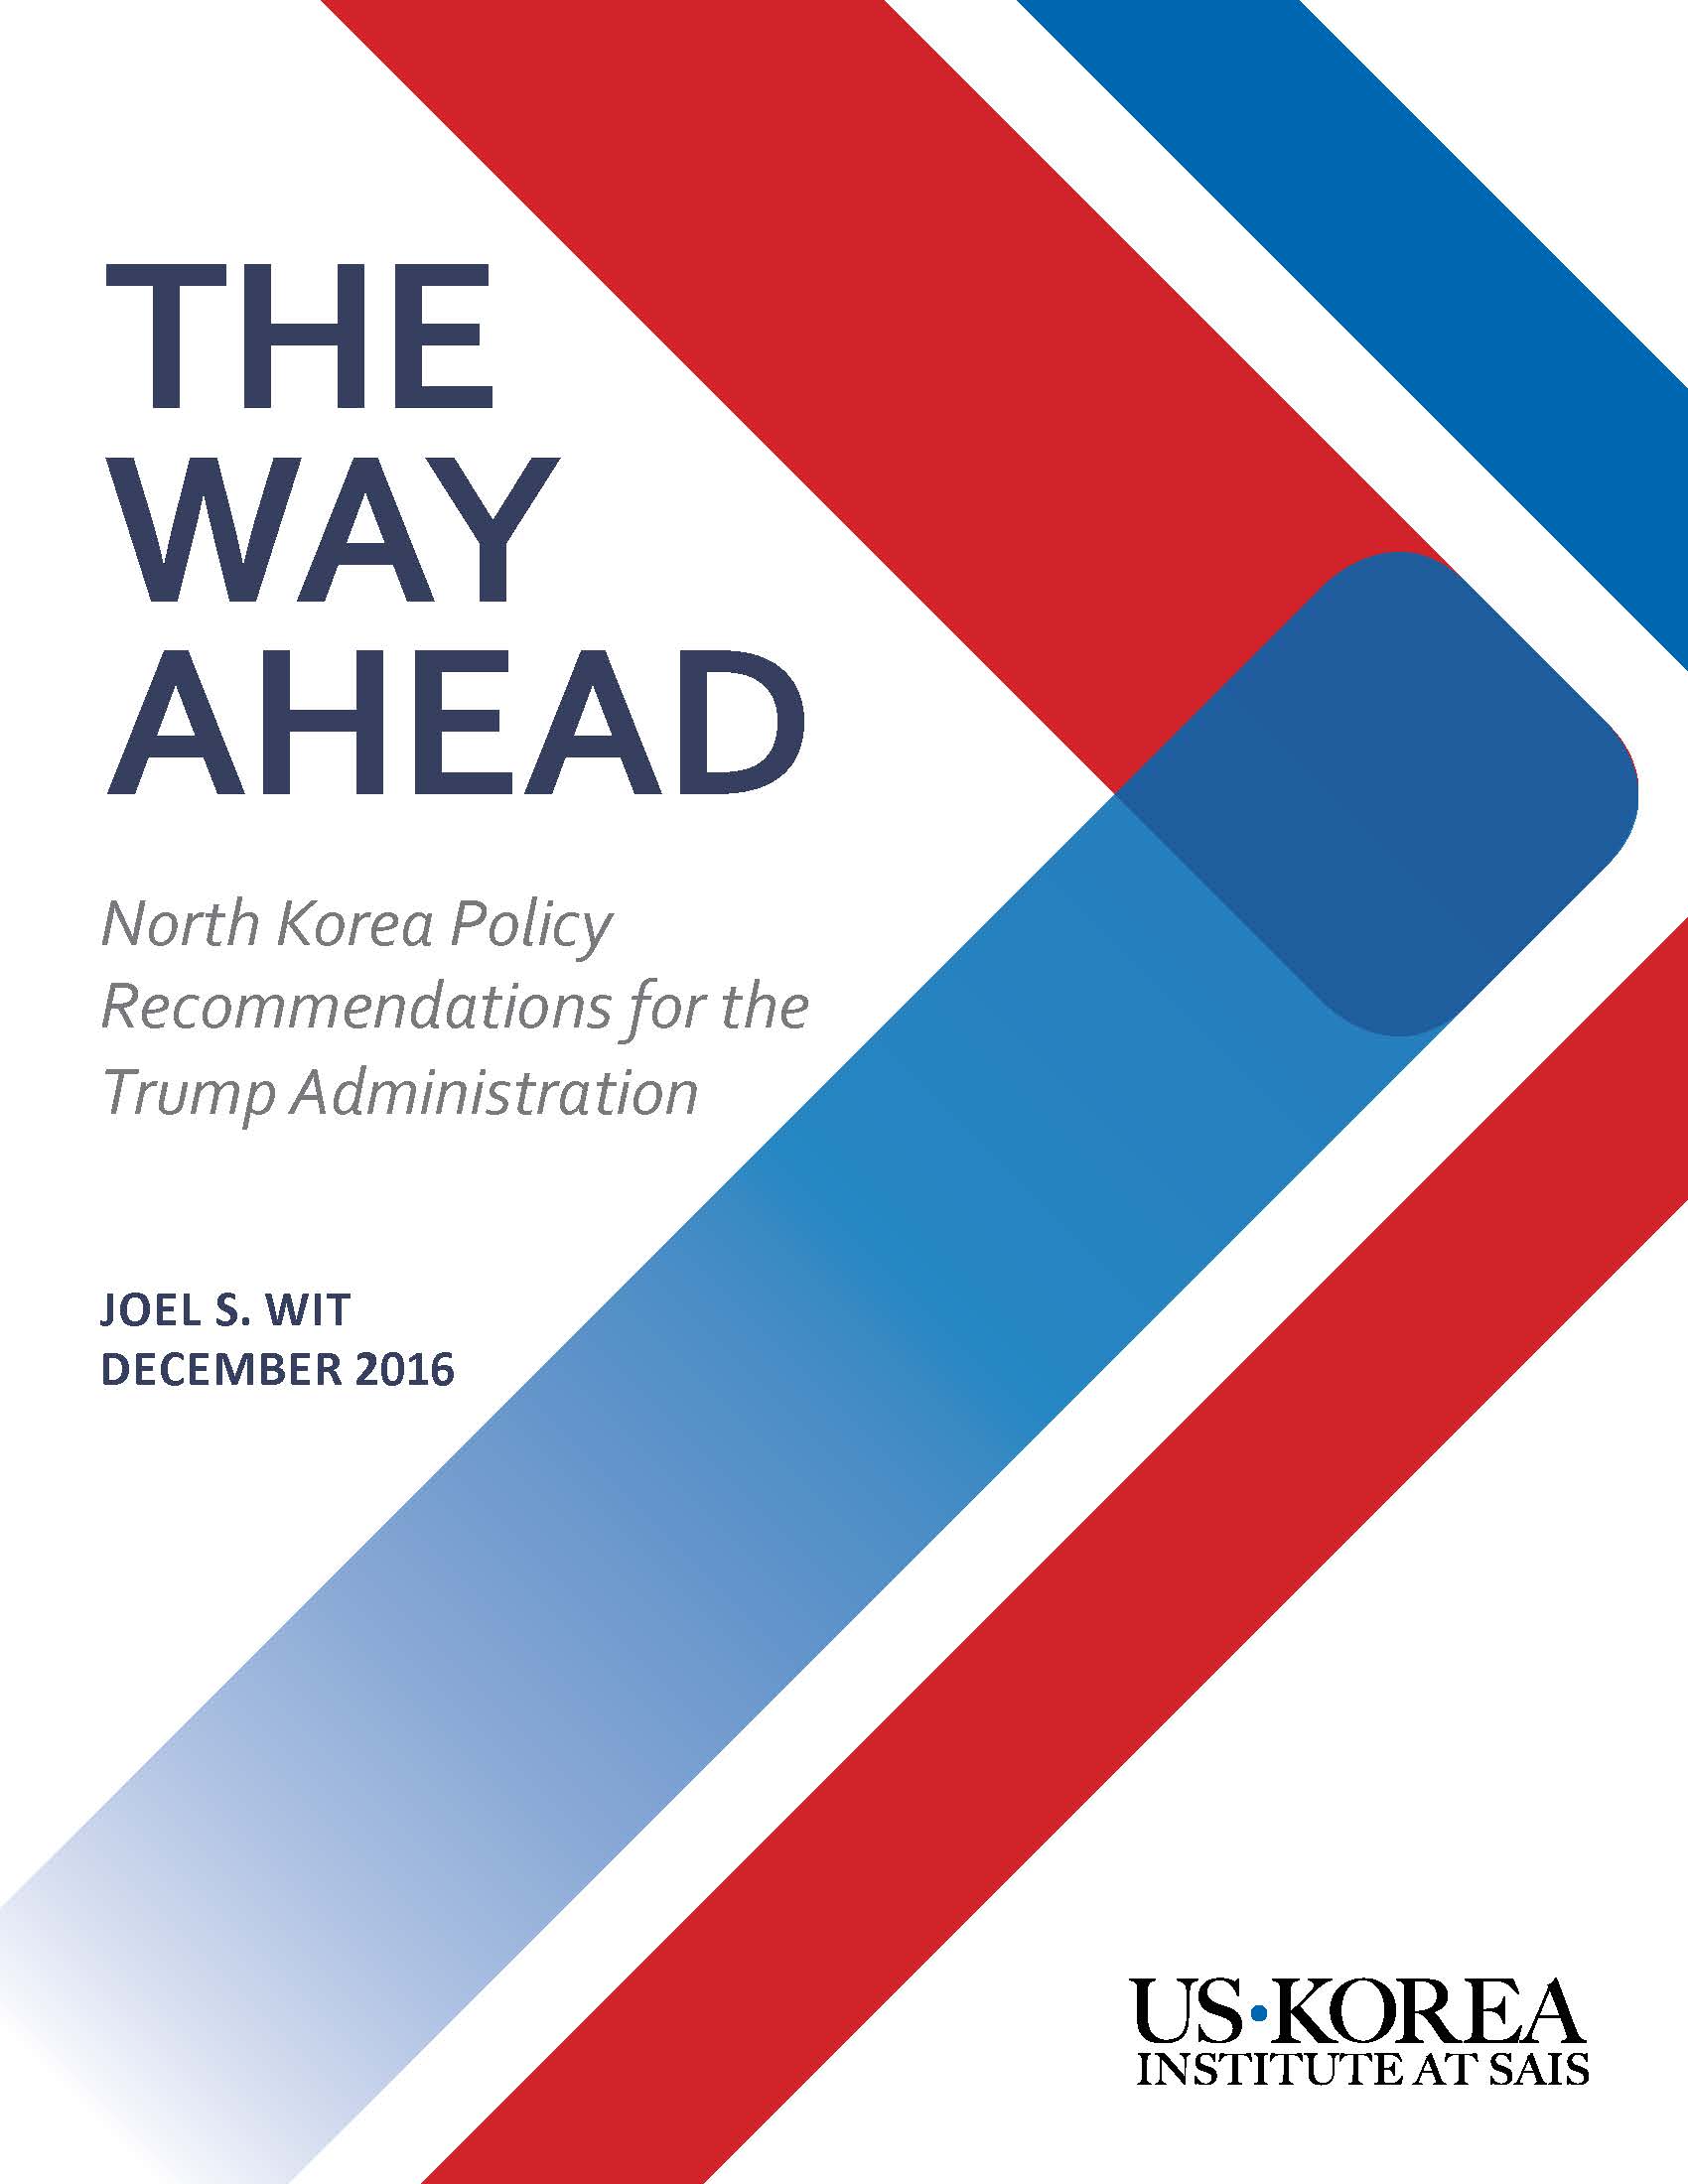 The Way Ahead: North Korea Policy Recommendations for the Trump Administration